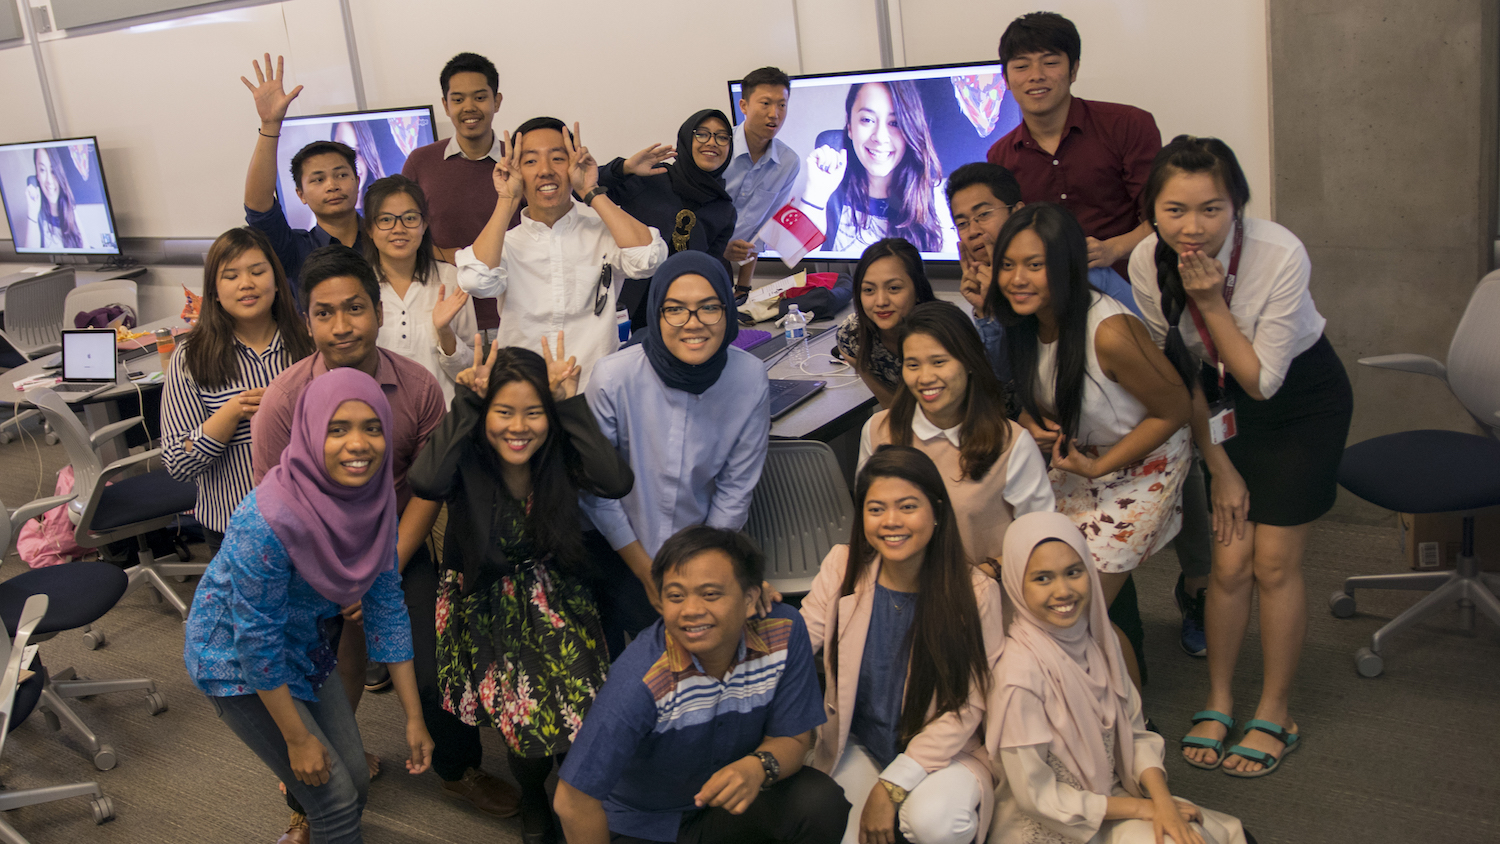 Photo of a large group of people posing for photo with a computer monitor on behind them with a caption of "Students from YSEALI Skyping with a social enterprise expert. Photographer: Marco-Alexis Chaira/ASU"